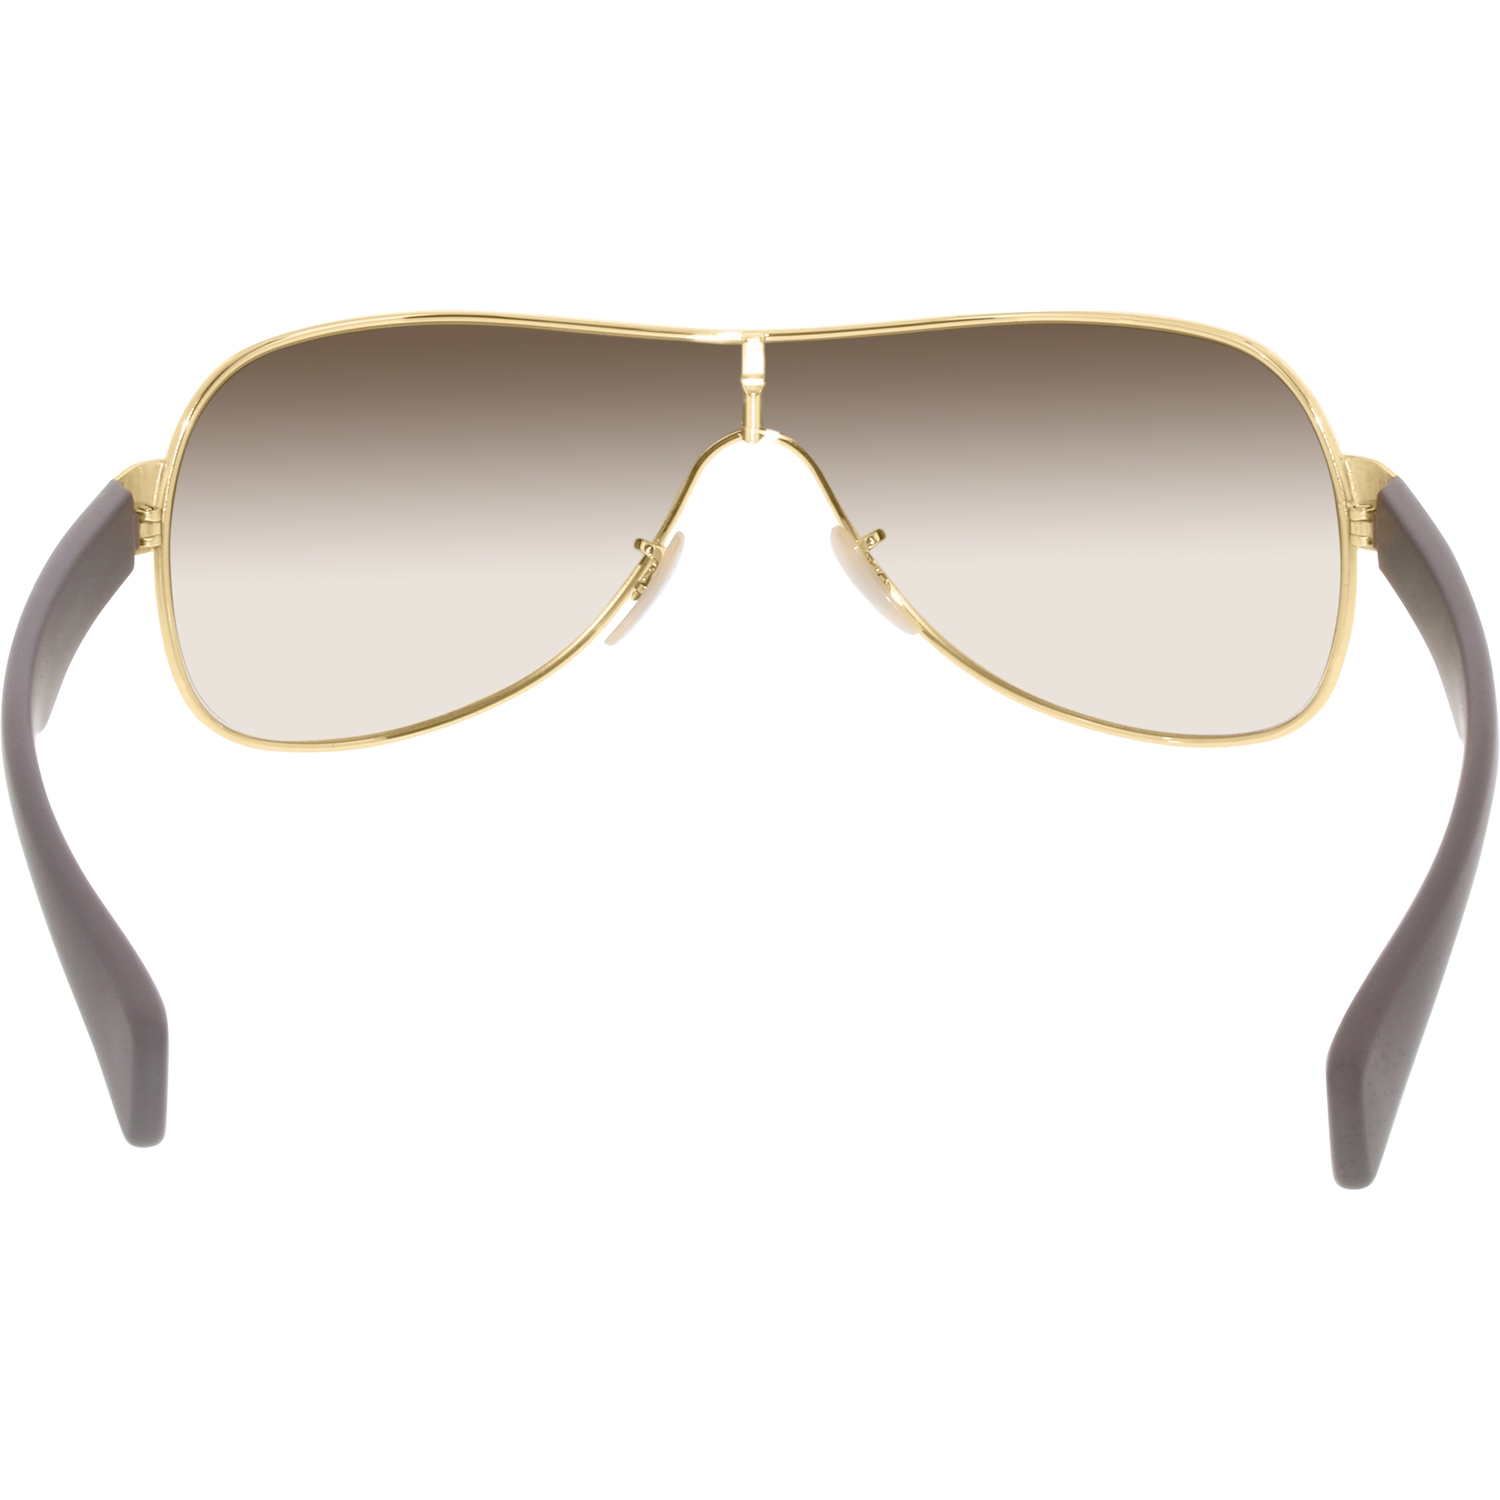 Ray-Ban Men's Gradient Highstreet RB3471-001/13-32 Gold Shield Sunglasses - image 3 of 3